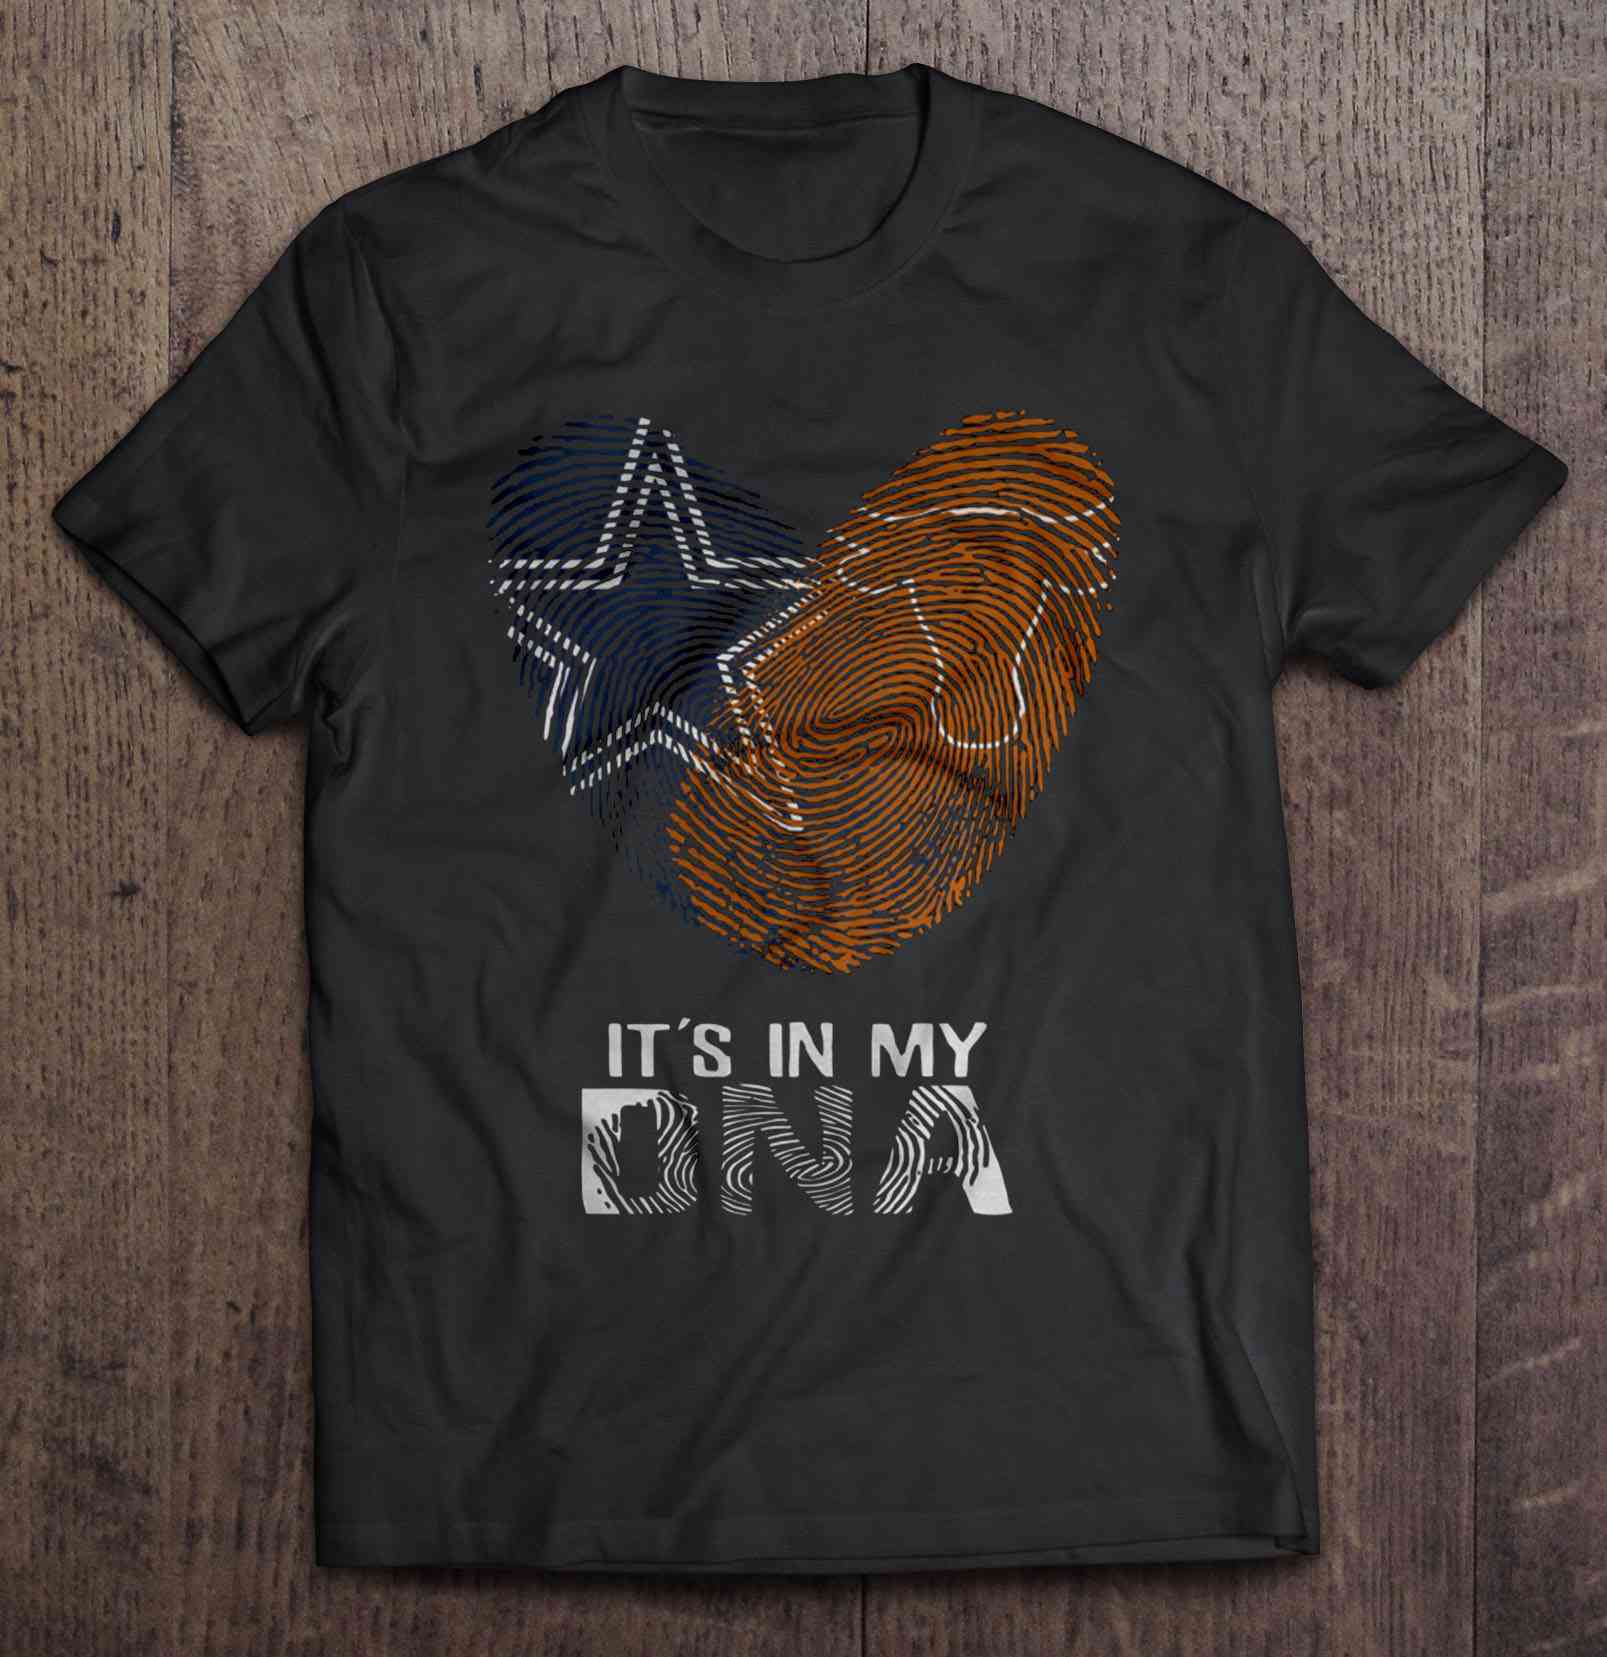 Dallas Cowboys And Texas Longhorns It's In My DNA